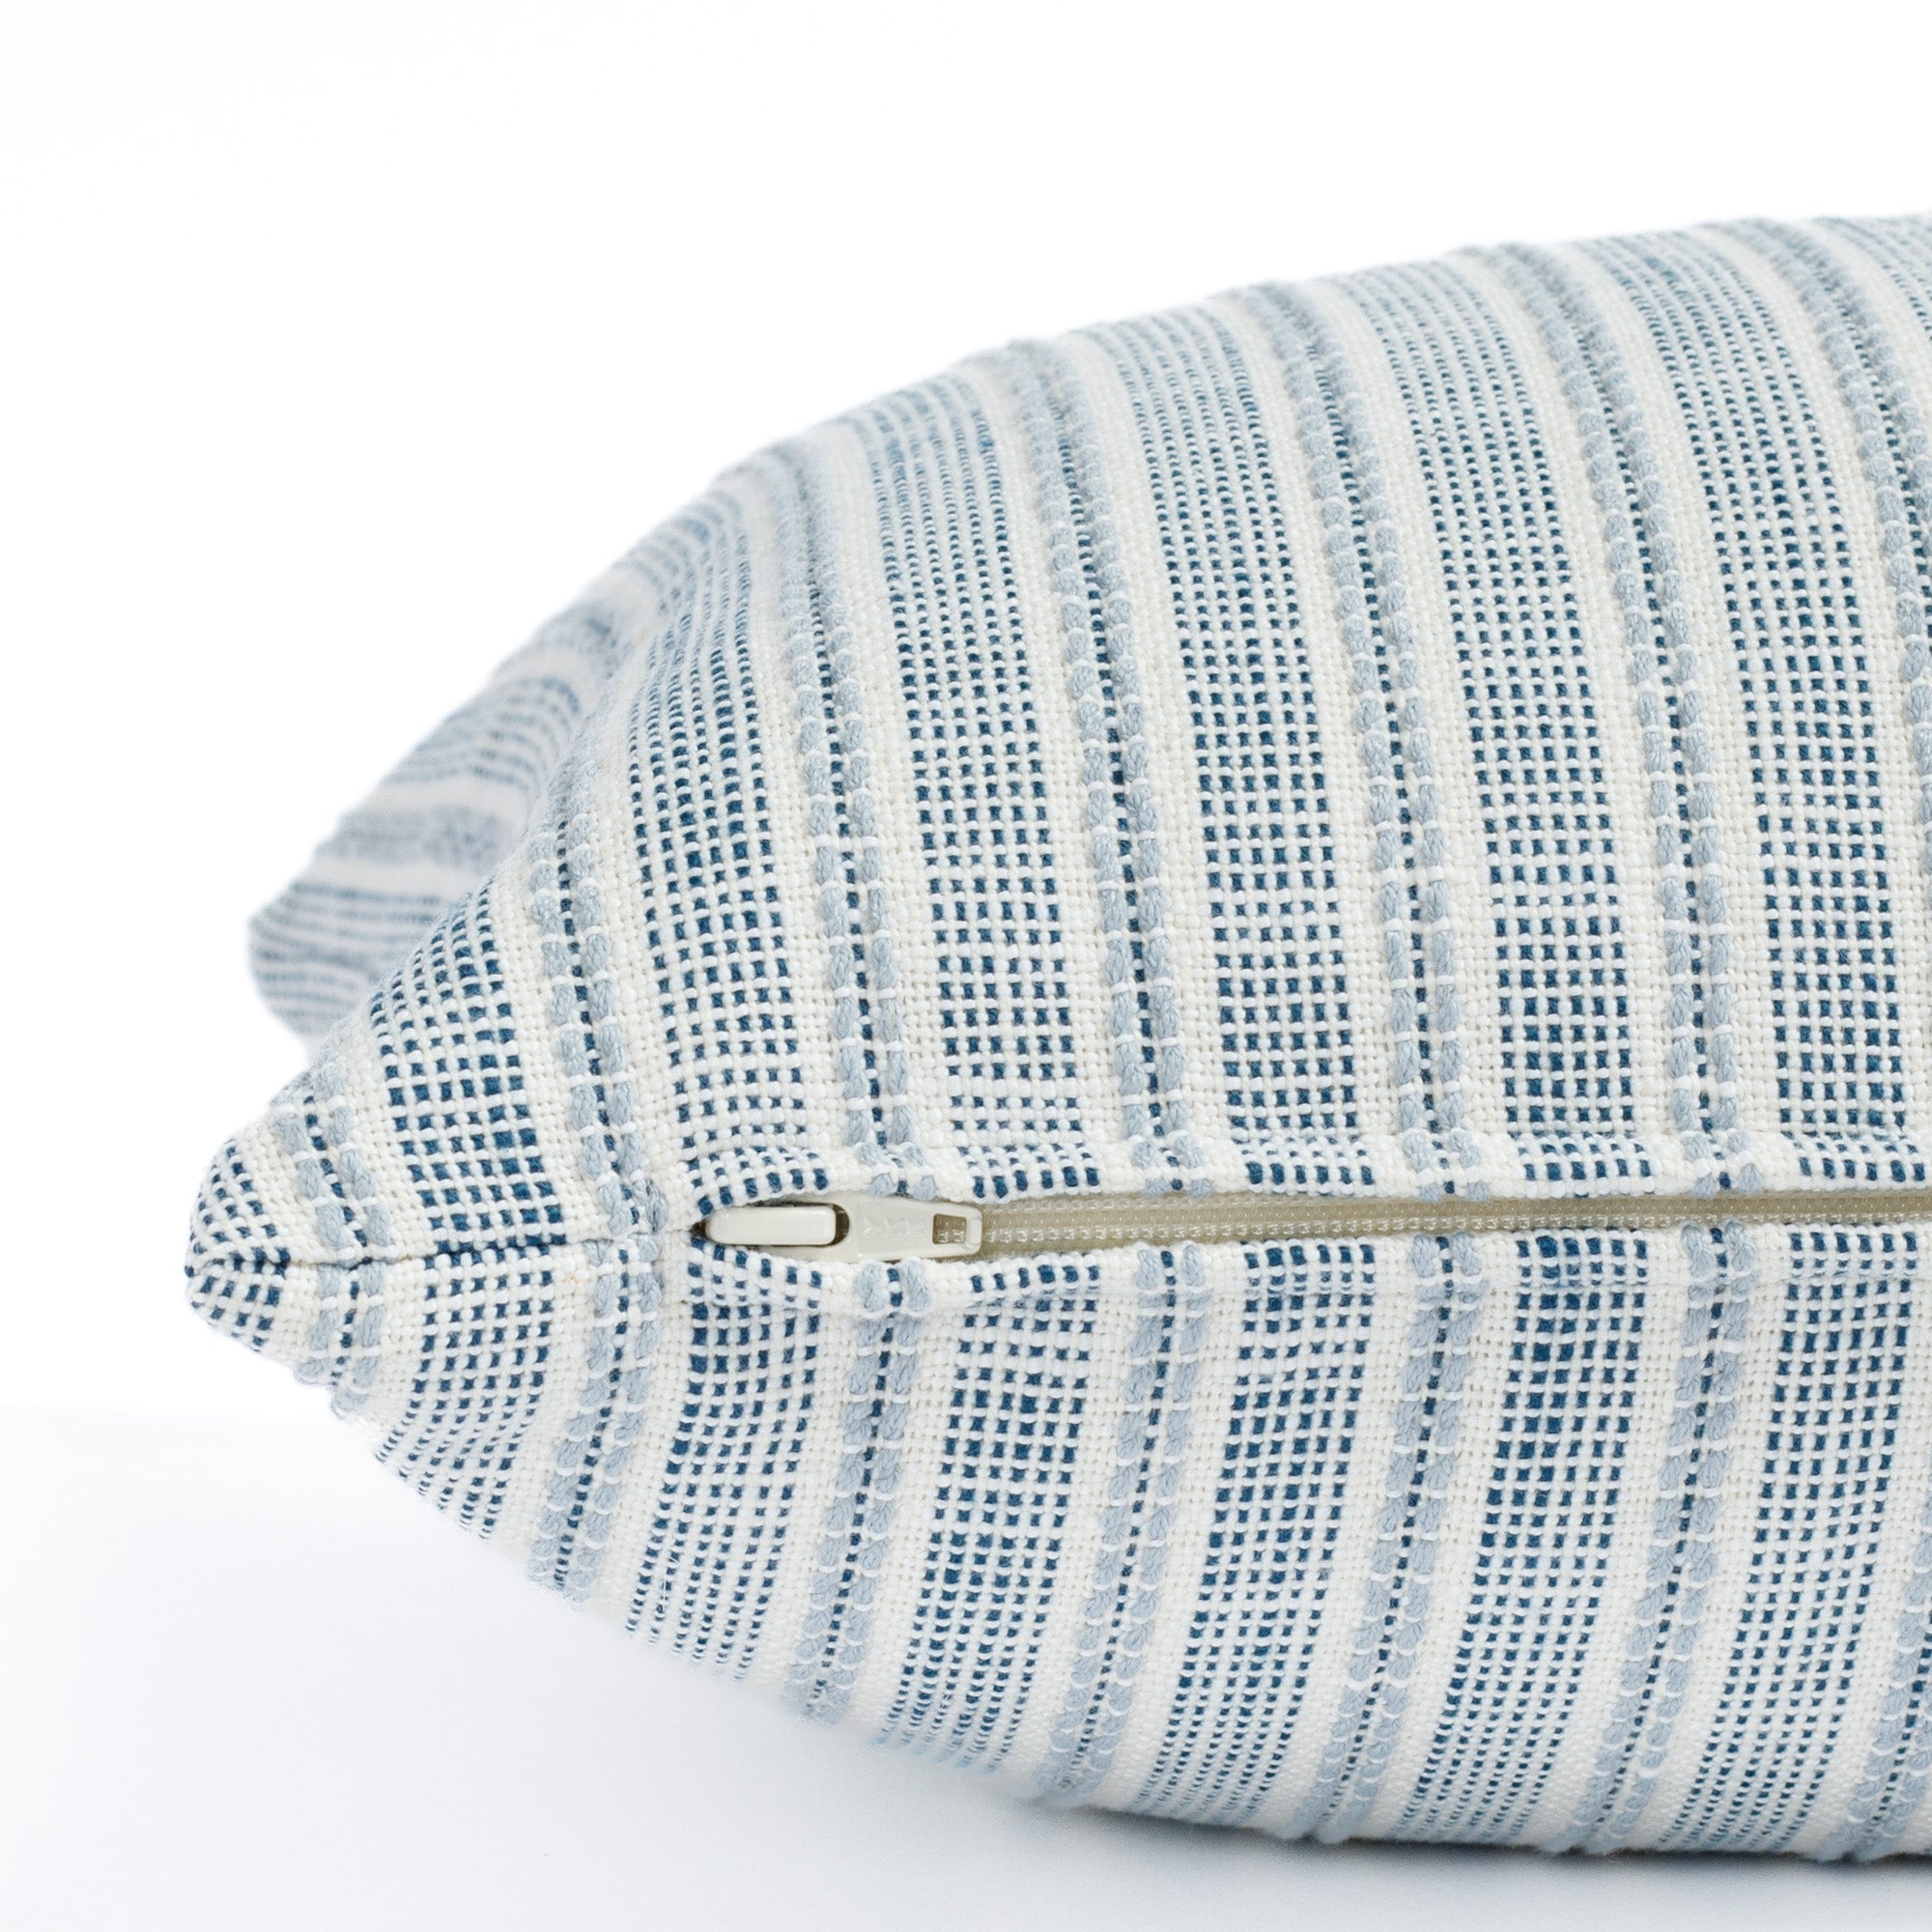 a white and blue outdoor throw pillow : close up zipper view